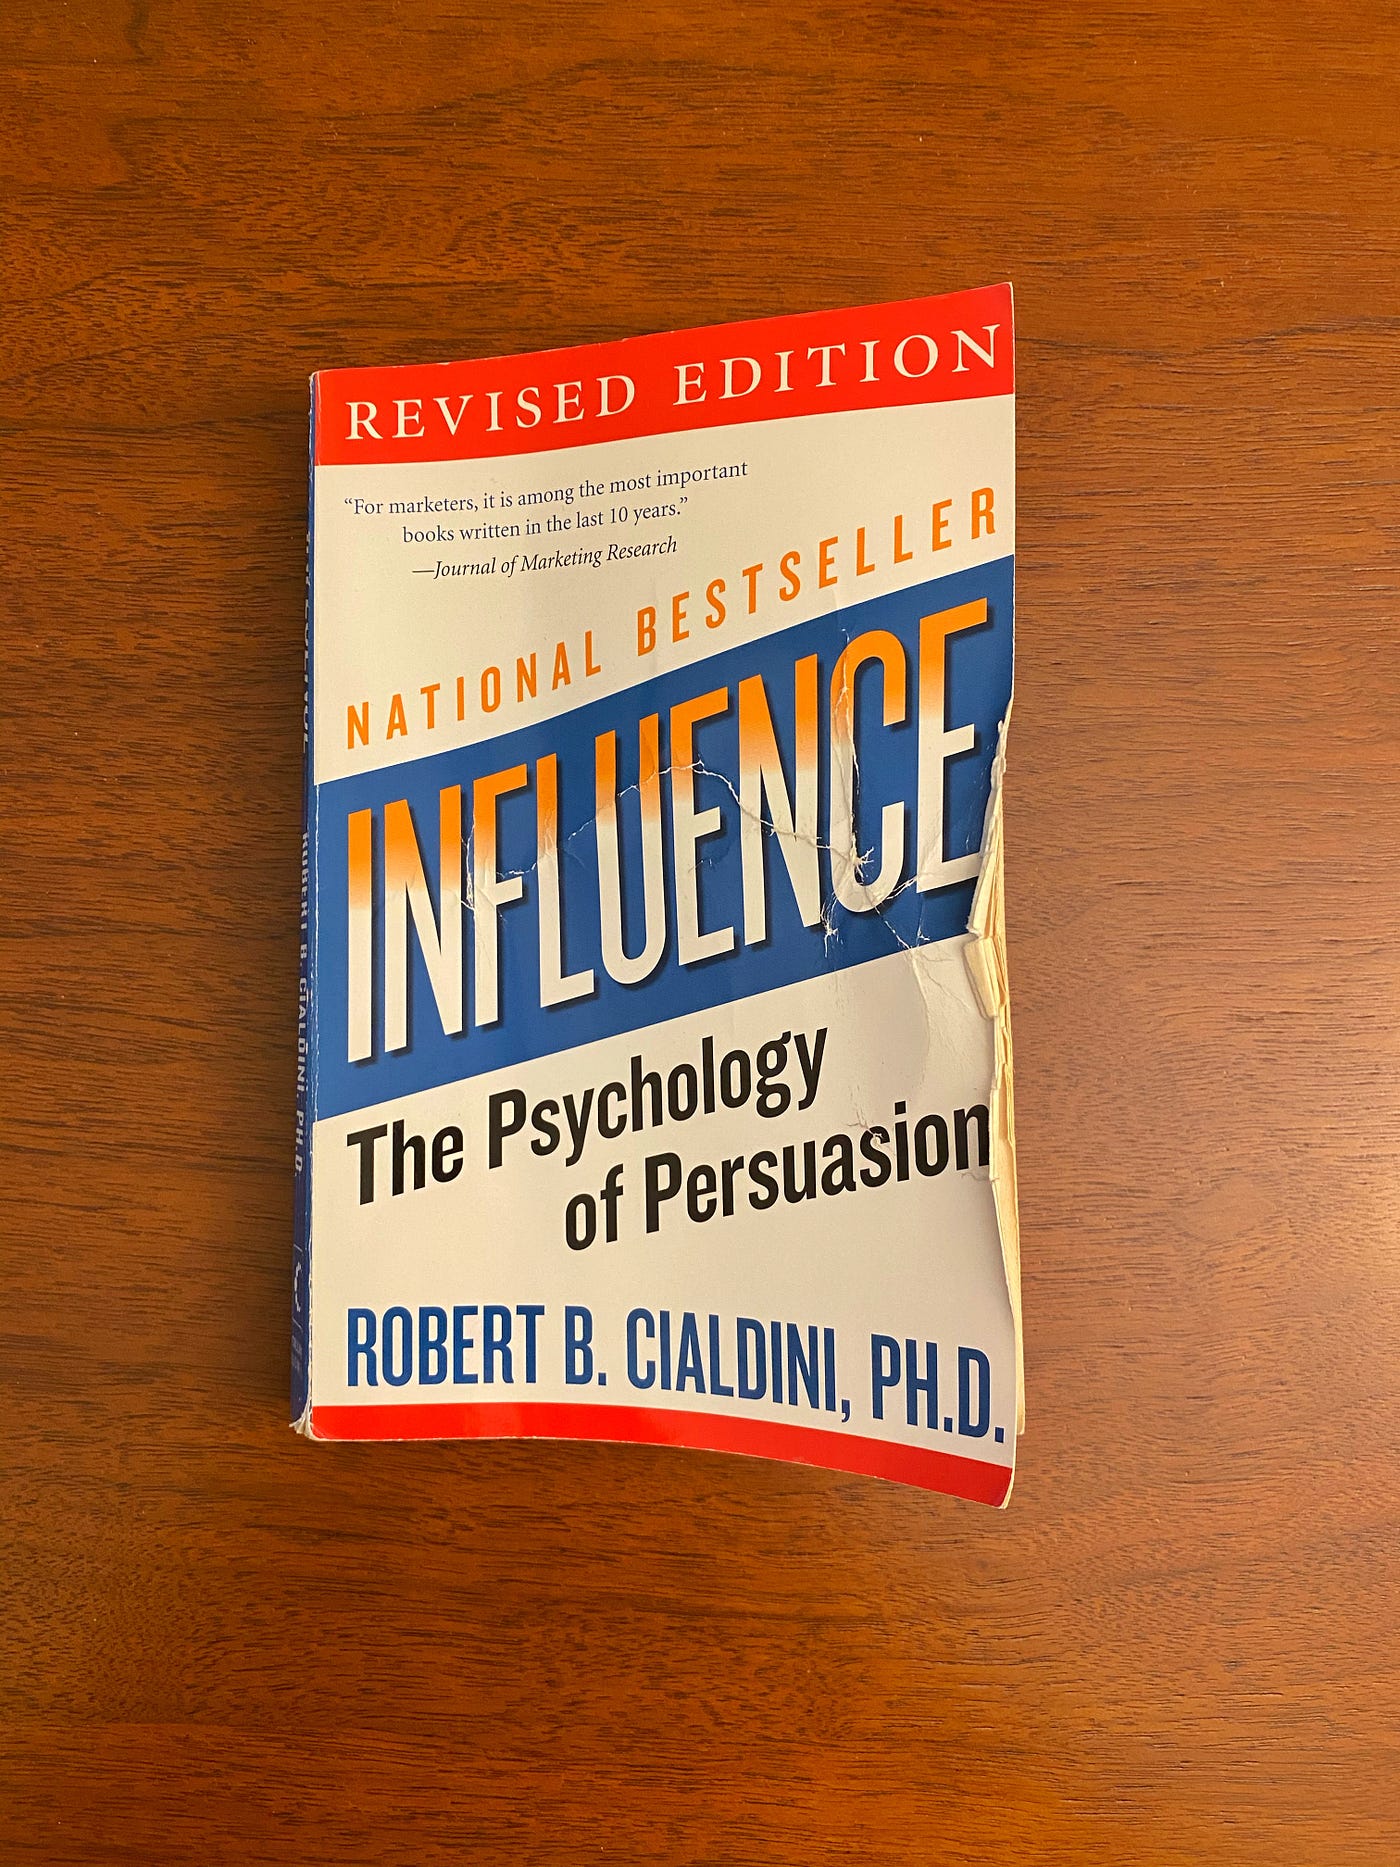 Book Review: “Influence: The Psychology of Persuasion” by Robert B. Cialdini, by Justin Zhuo Yan He